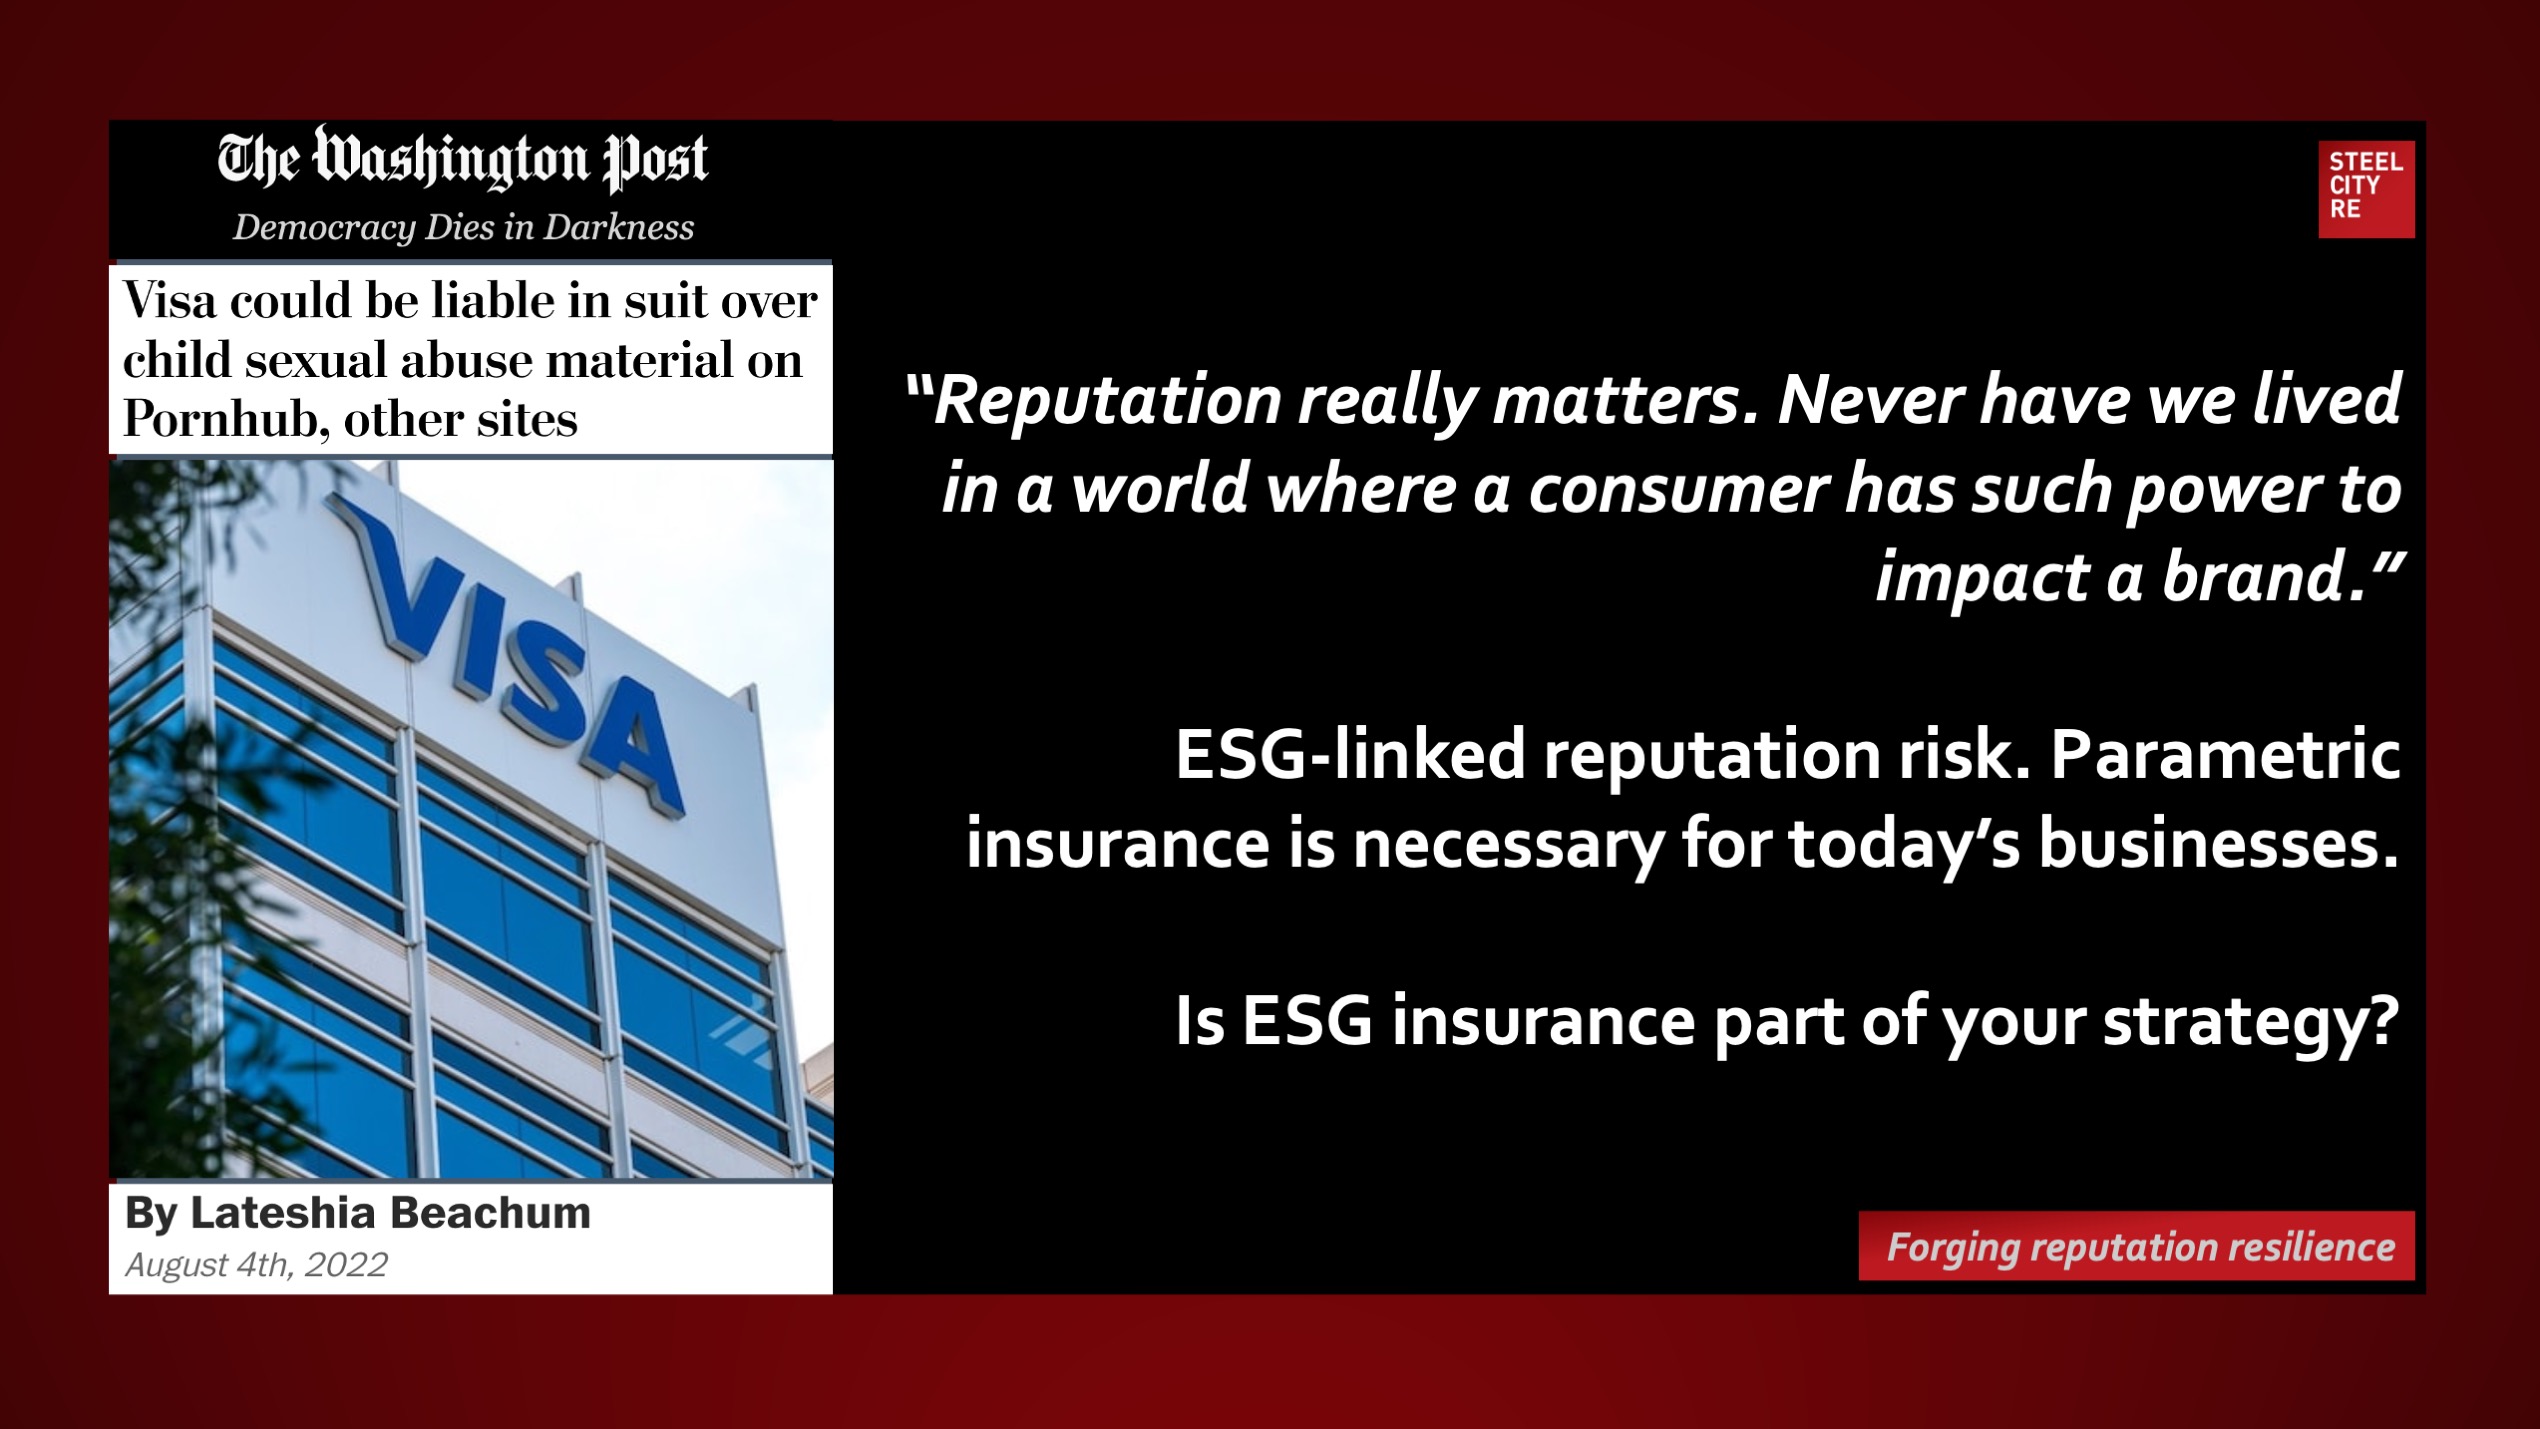 ESG-linked reputation risk. Parametric insurance is a necessary element for today’s businesses.